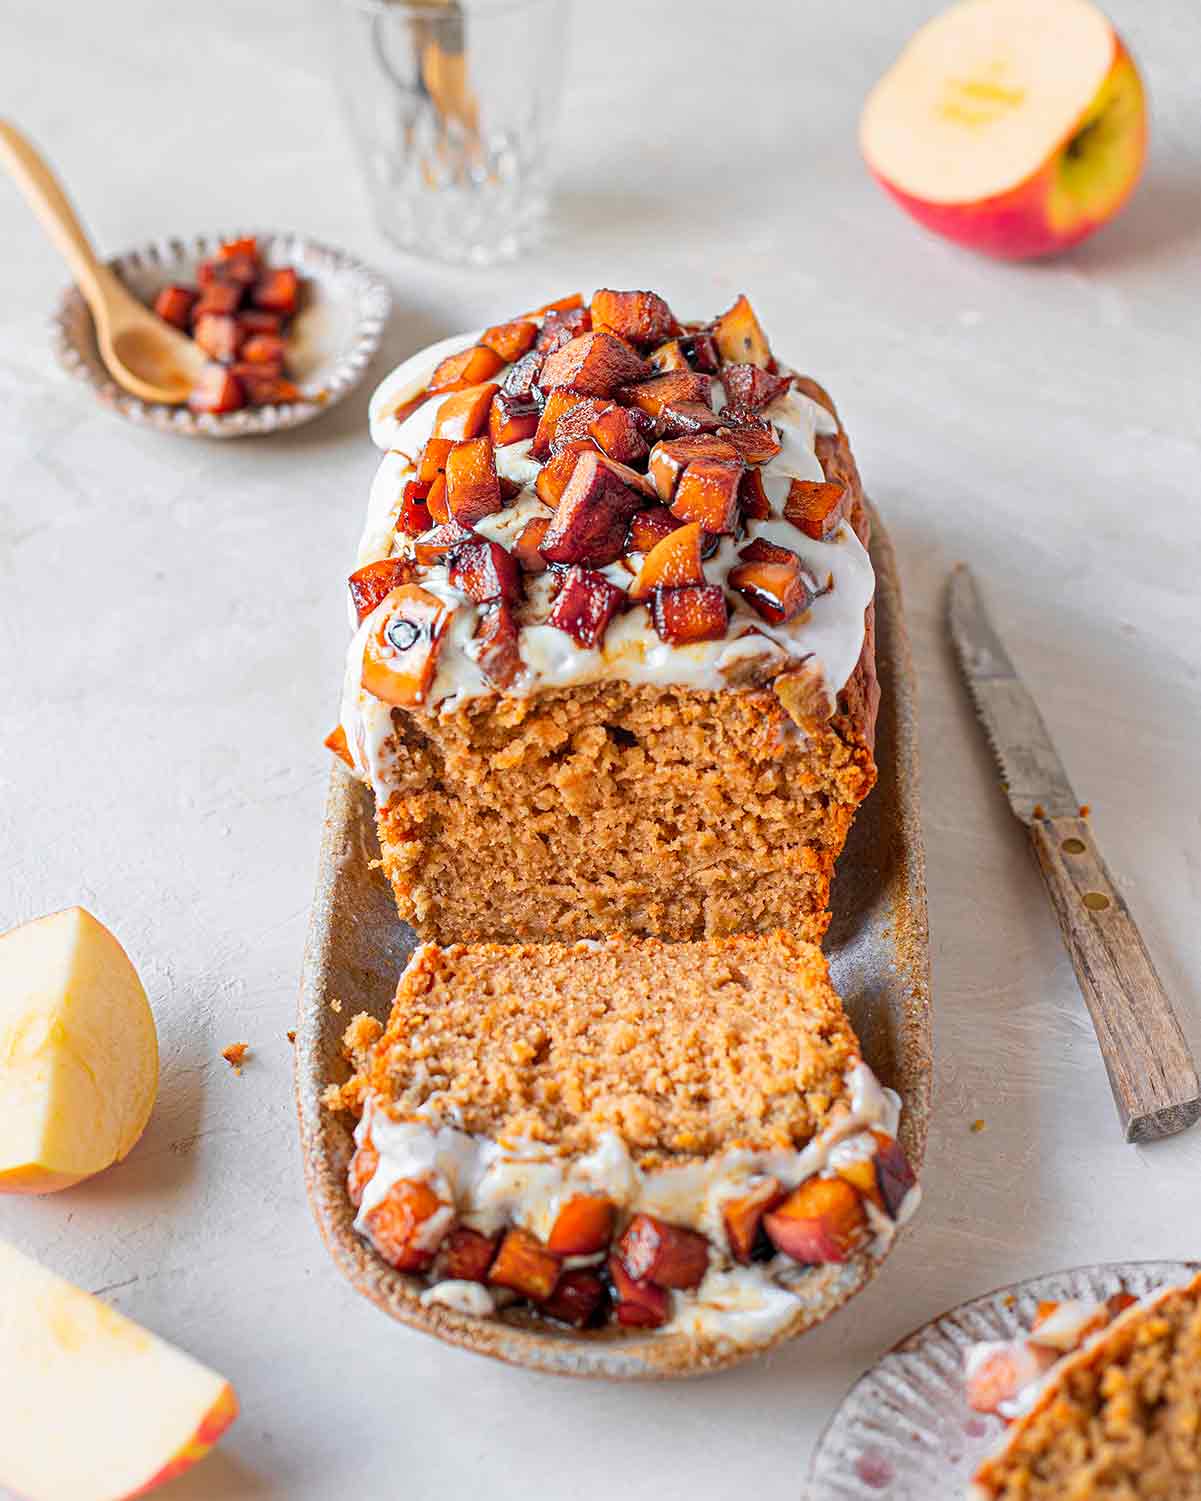 Vegan apple bread topped with coconut yoghurt and caramelised apples. A slice of the vegan apple loaf is cut out showing the moist texture.